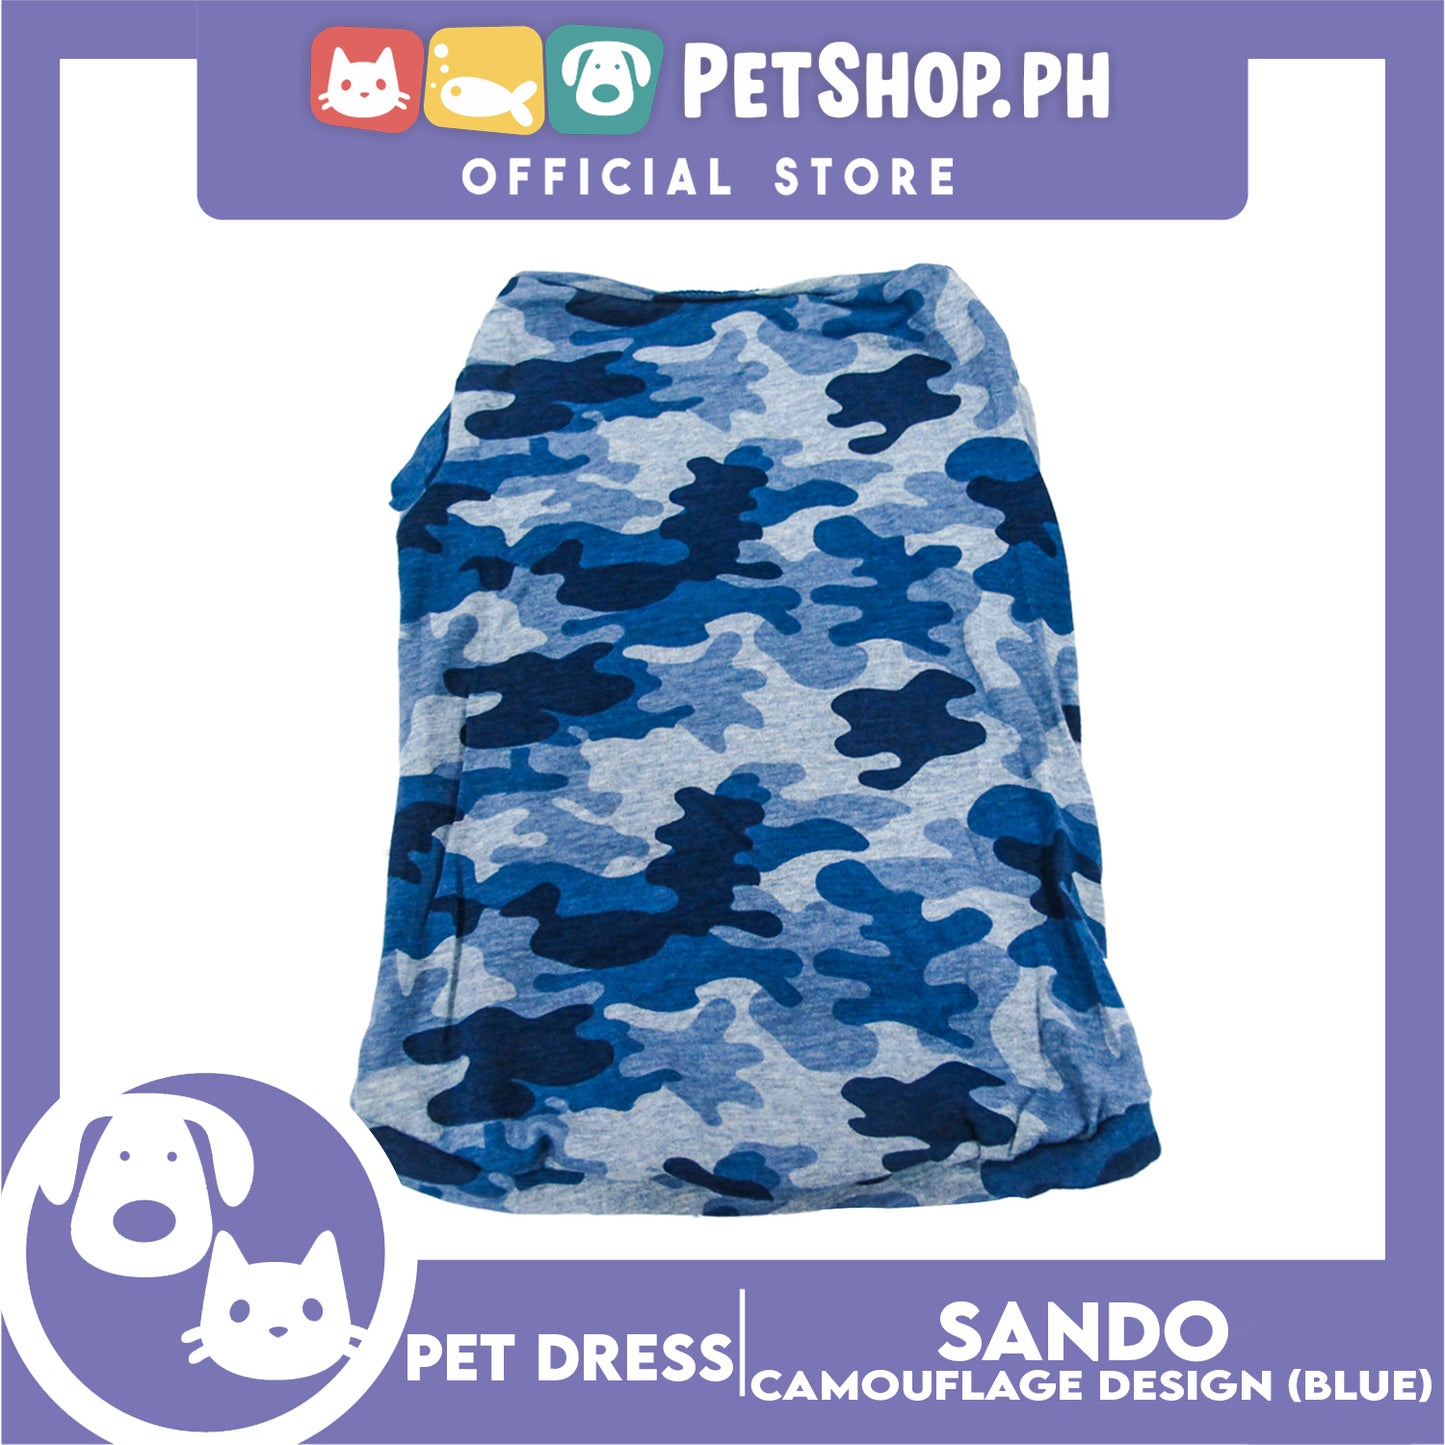 Pet Shirt Camouflage Design Sleeveless Blue (Medium) for Puppy, Small Dogs and Cats- Sando Breathable Clothes, Pet T-shirt